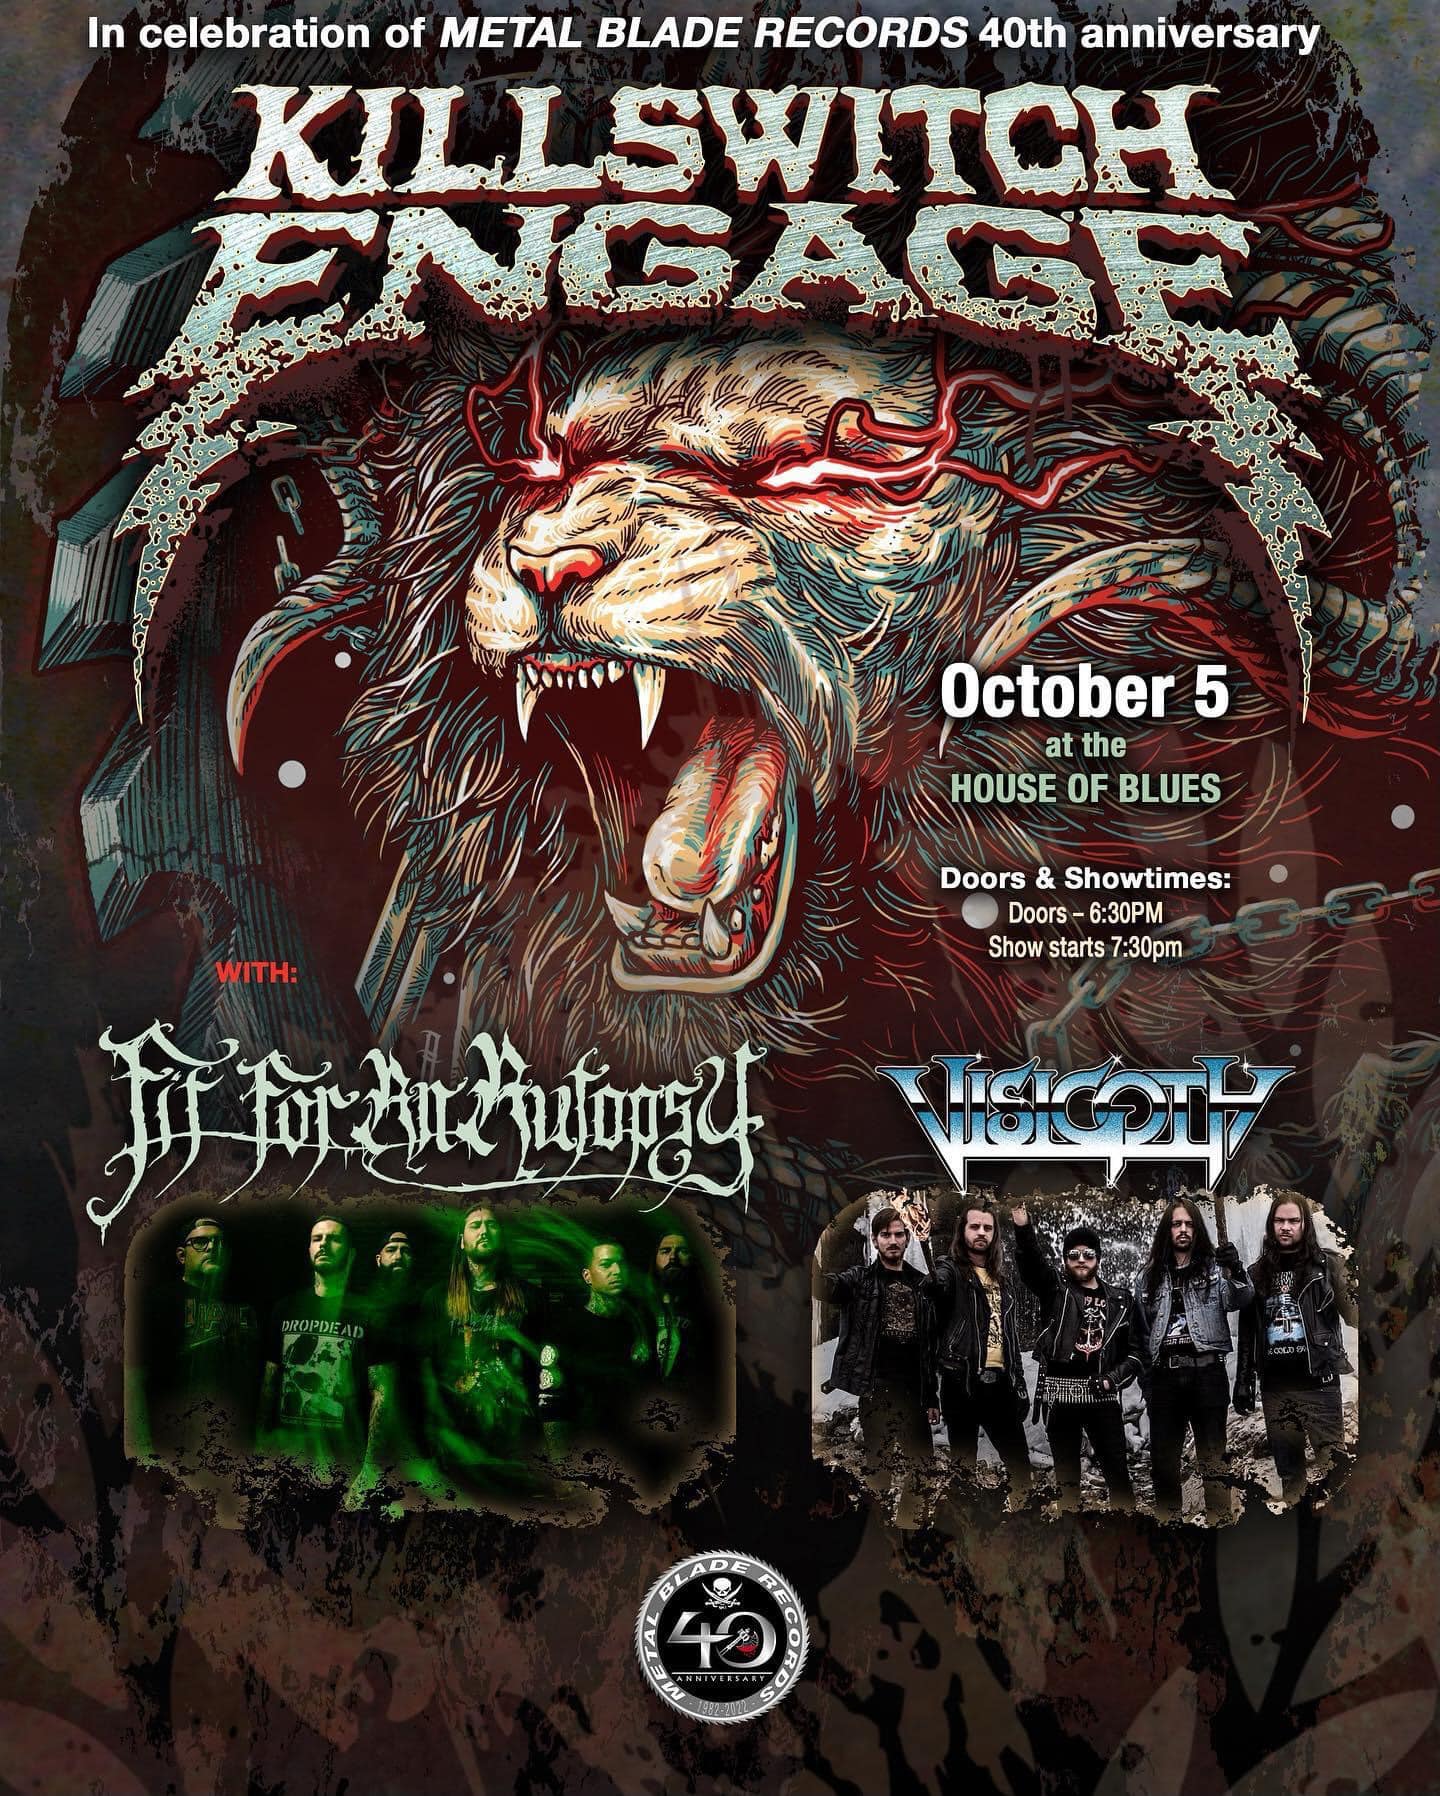 KILLSWITCH ENGAGE to take over HOBLV for Metal Blade 40th Anniversary!